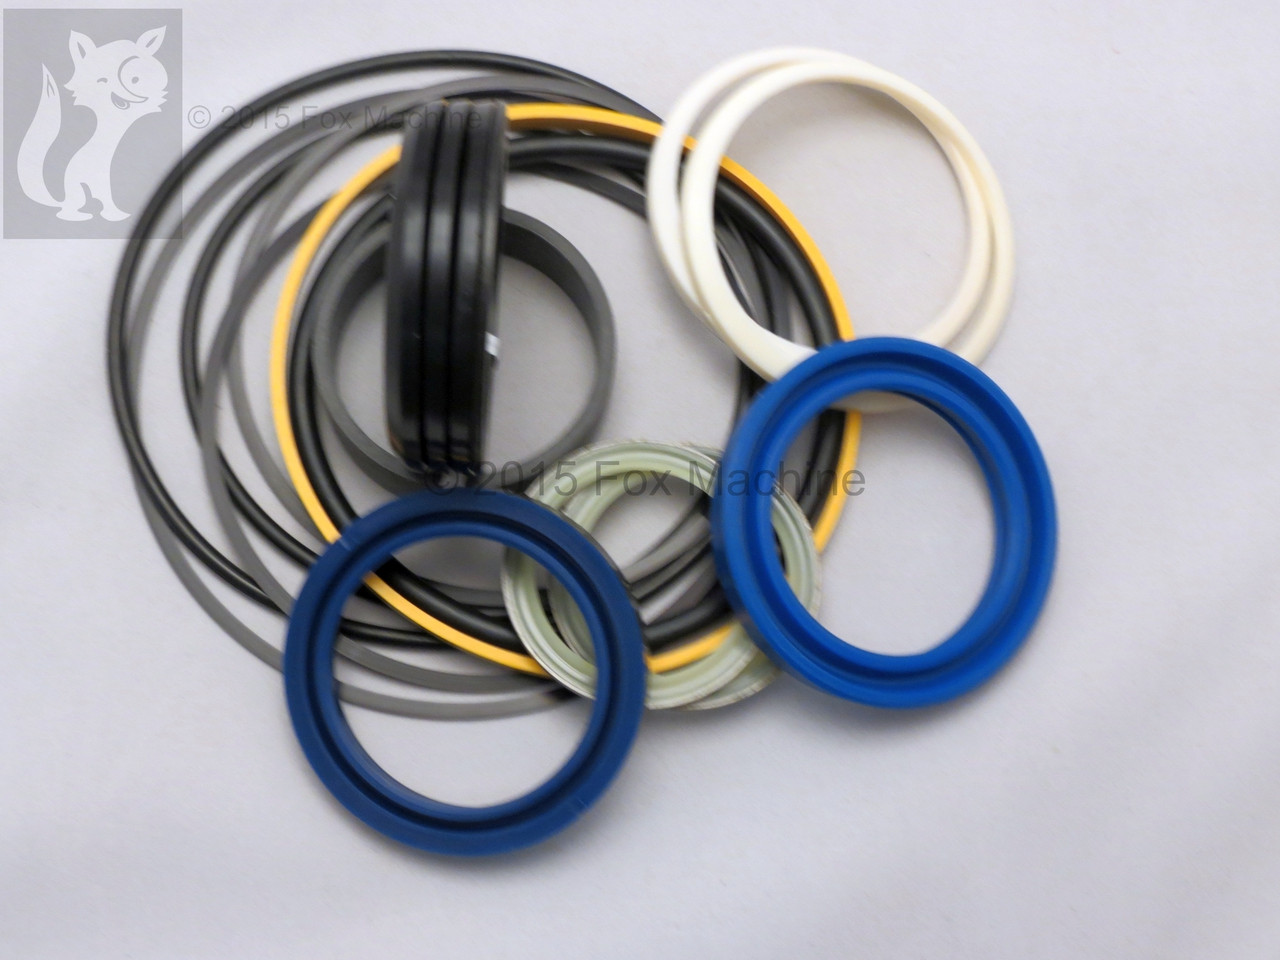 Hydraulic Seal Kit for Ford 655A hoe Boom Lift 63 mm Rod 2-1/2" 